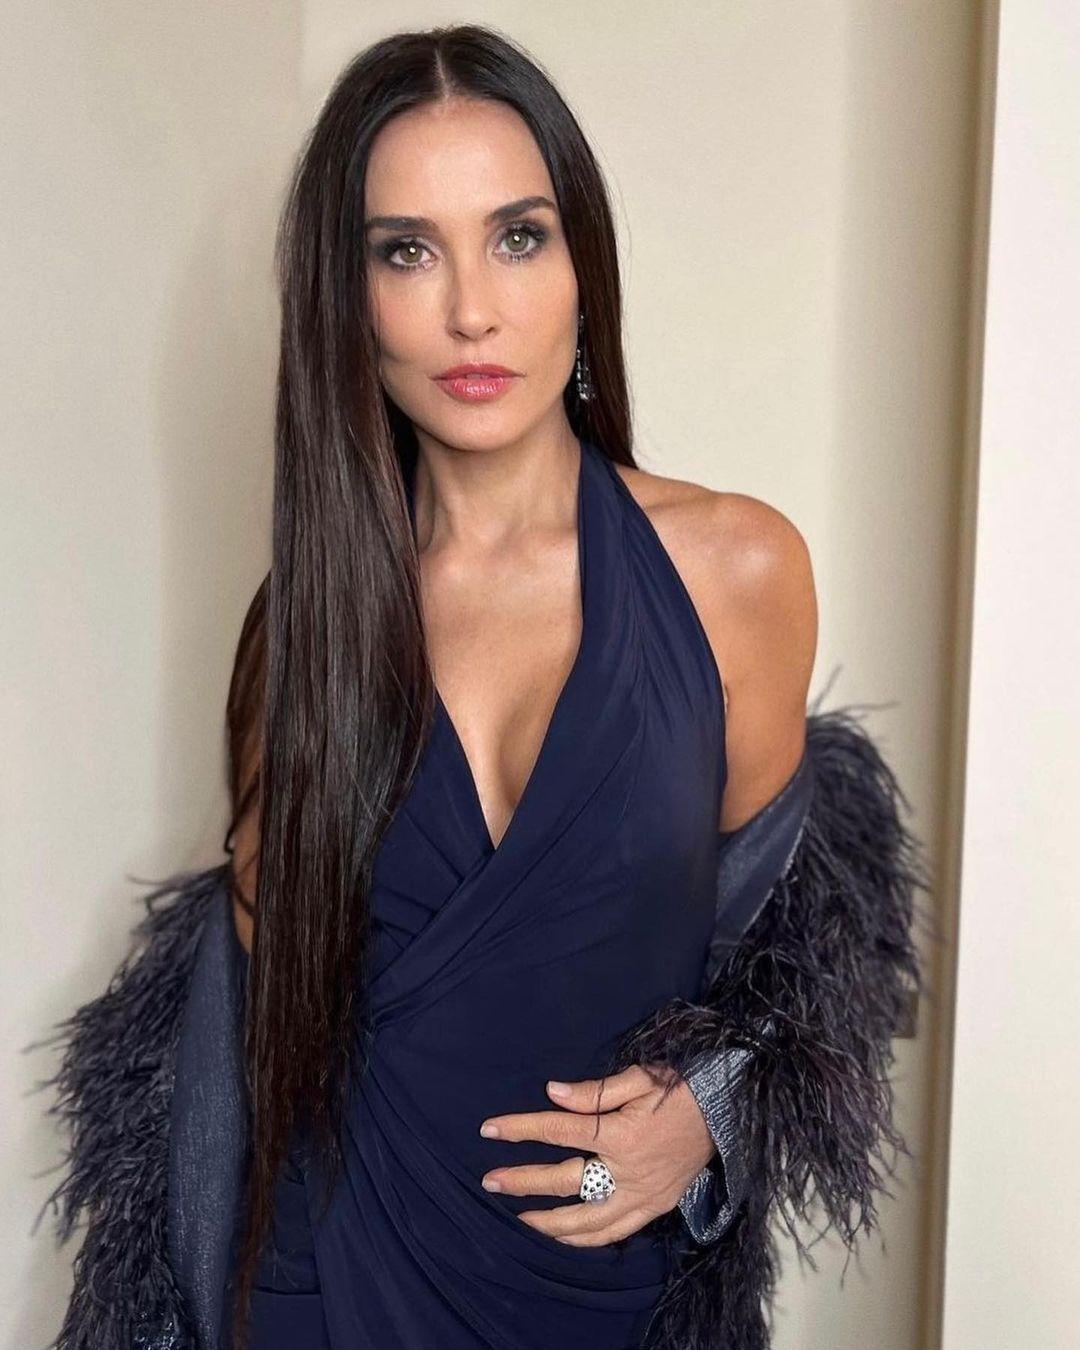 Demi Moore defies age in new photos